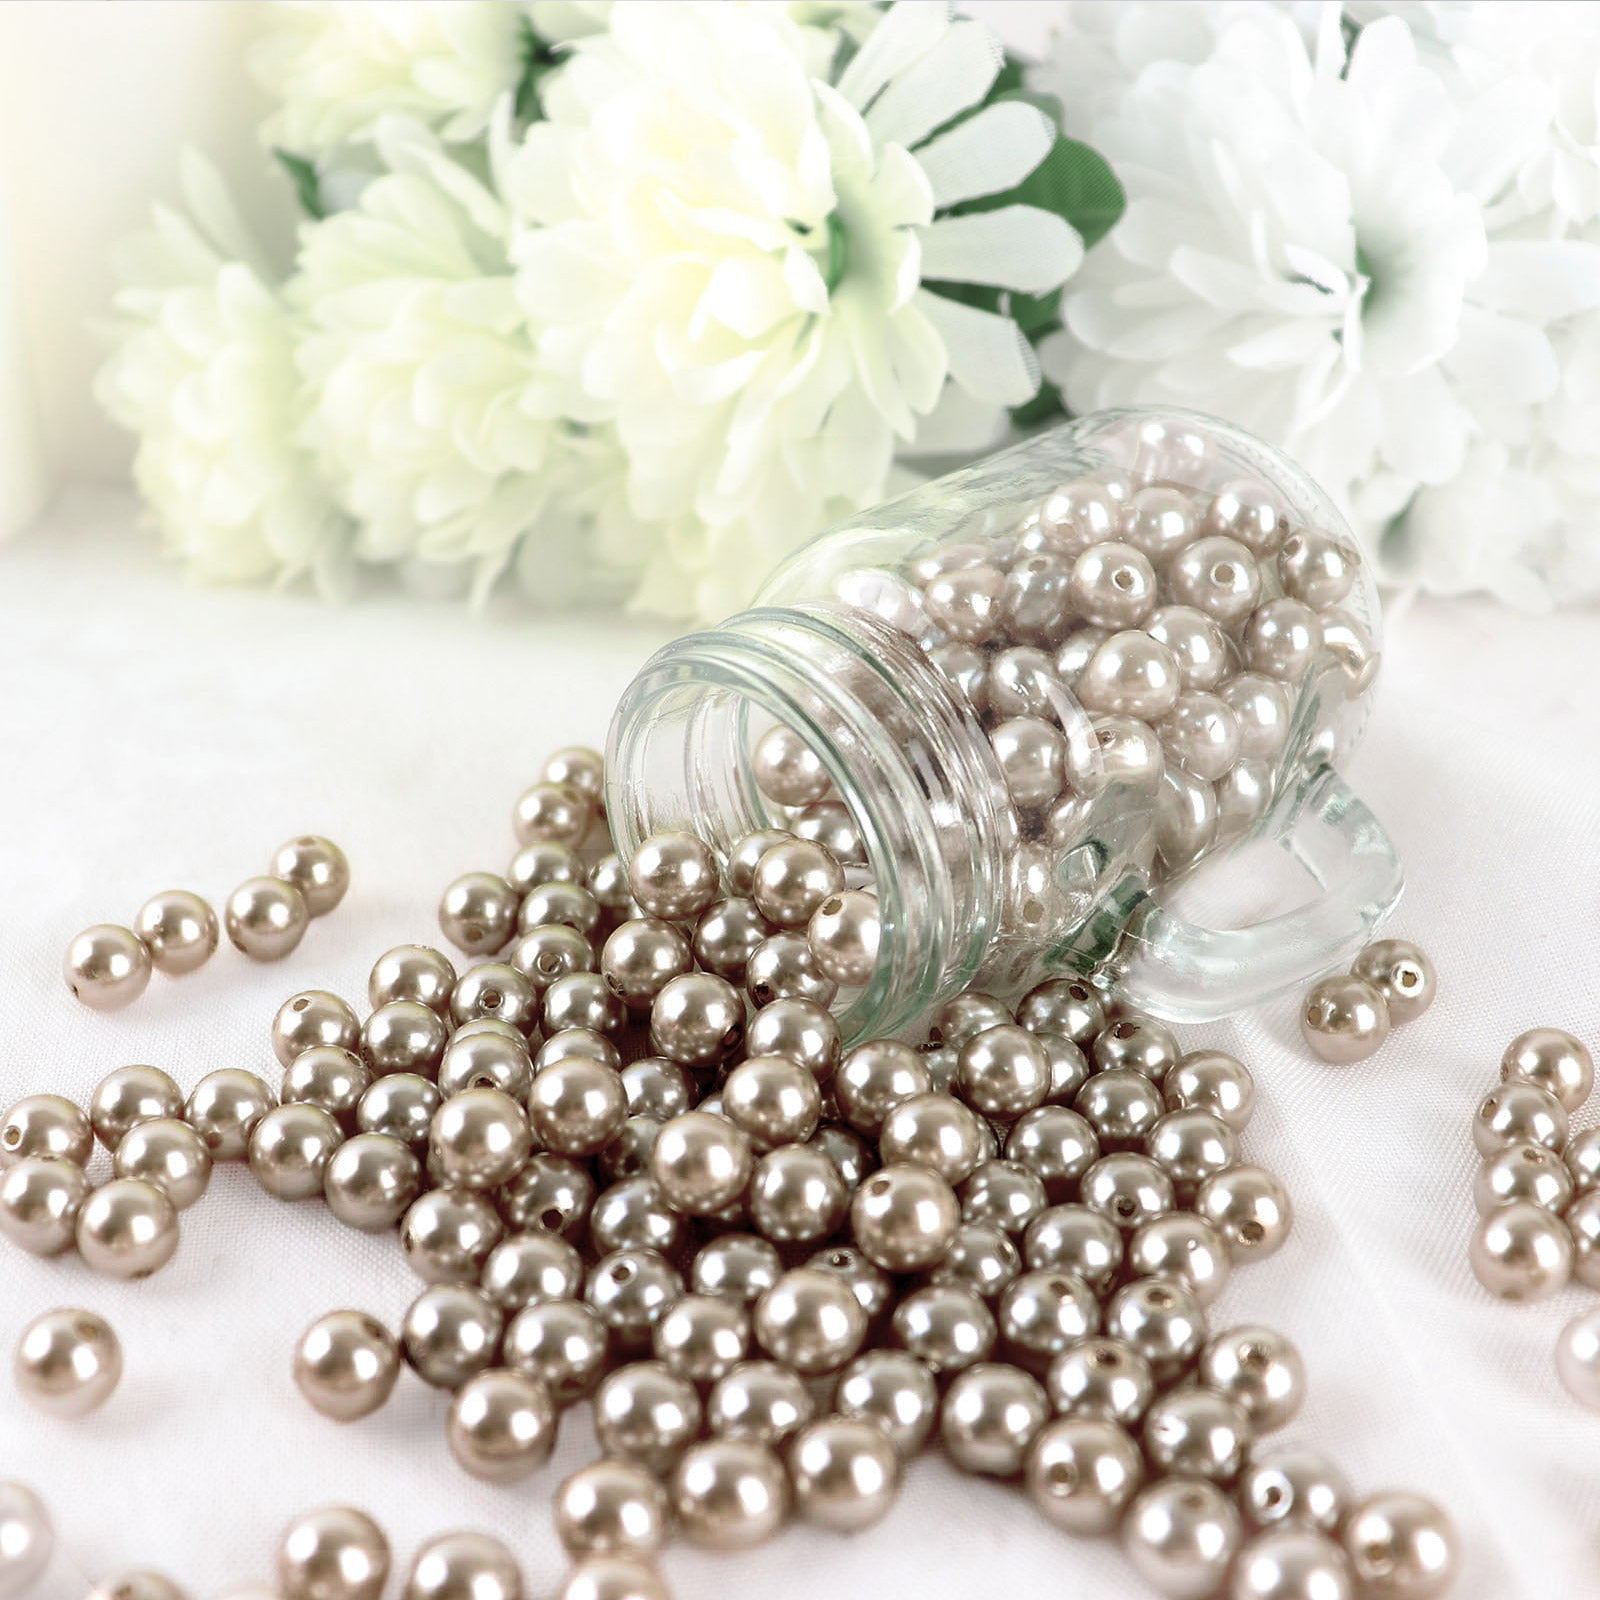 BESTOYARD 125pcs Vase Filled with Pearls Rose Decor Chamois Table  Decorations Mini Pearls Pearl for Vase Filler Vase Filler Beads Vase  Decorations